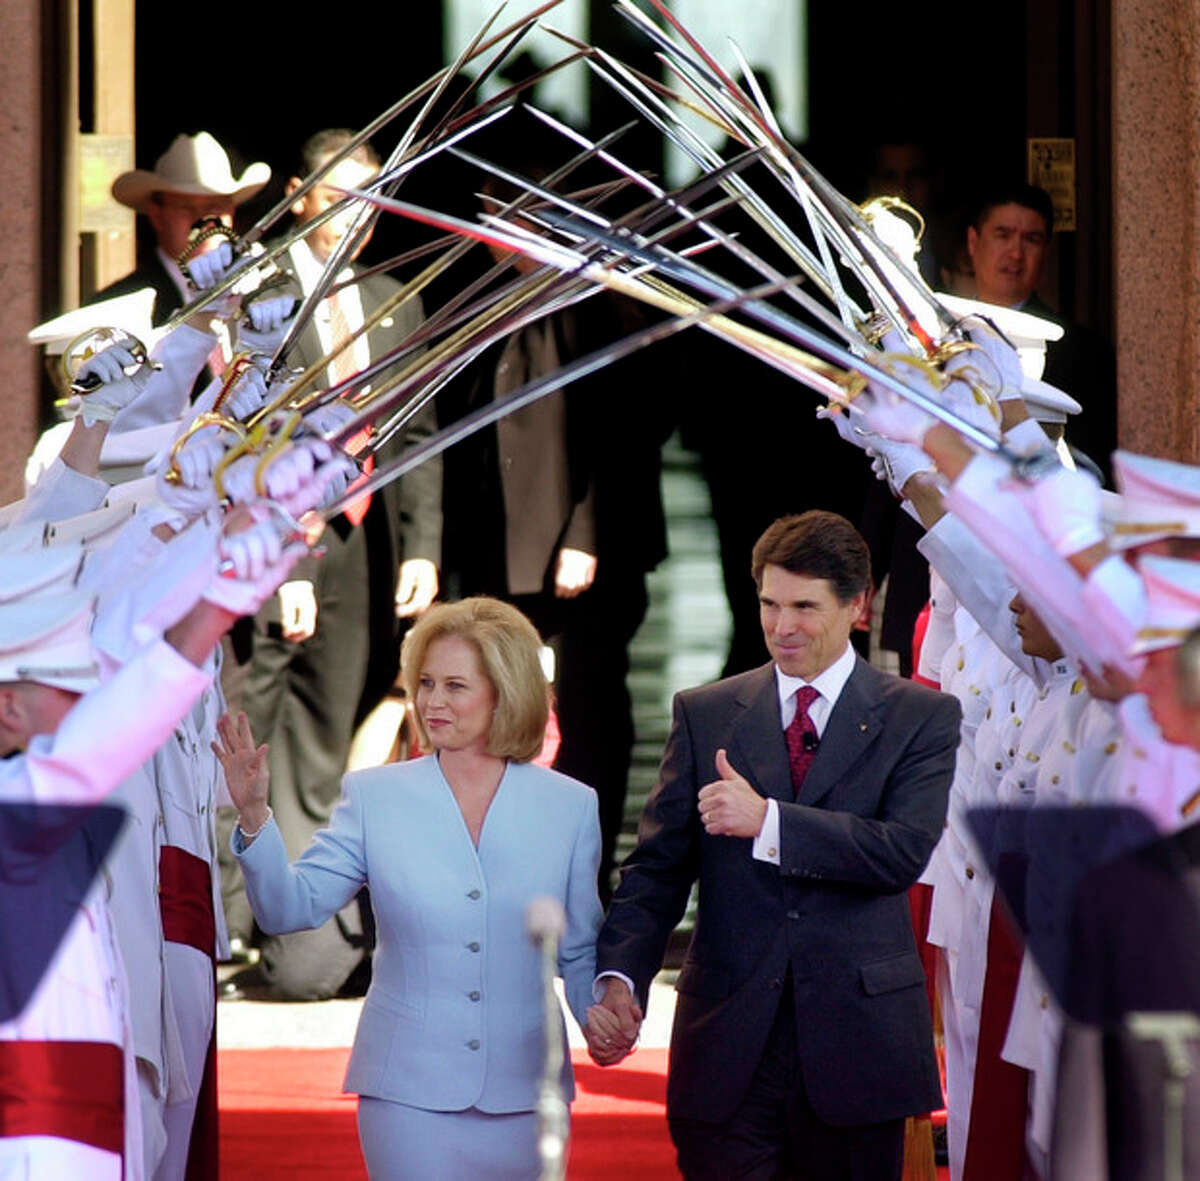 FILE - In this Jan. 21, 2003, file photo Texas Gov. Rick Perry, with his wife Anita, walks under the Ross Volunteers saber arch during Perry's inauguration in Austin, Texas. Perry announced Monday, July 8, 2013, that he would not seek re-election as Texas governor next year. (AP Photo/Eric Gay, File)